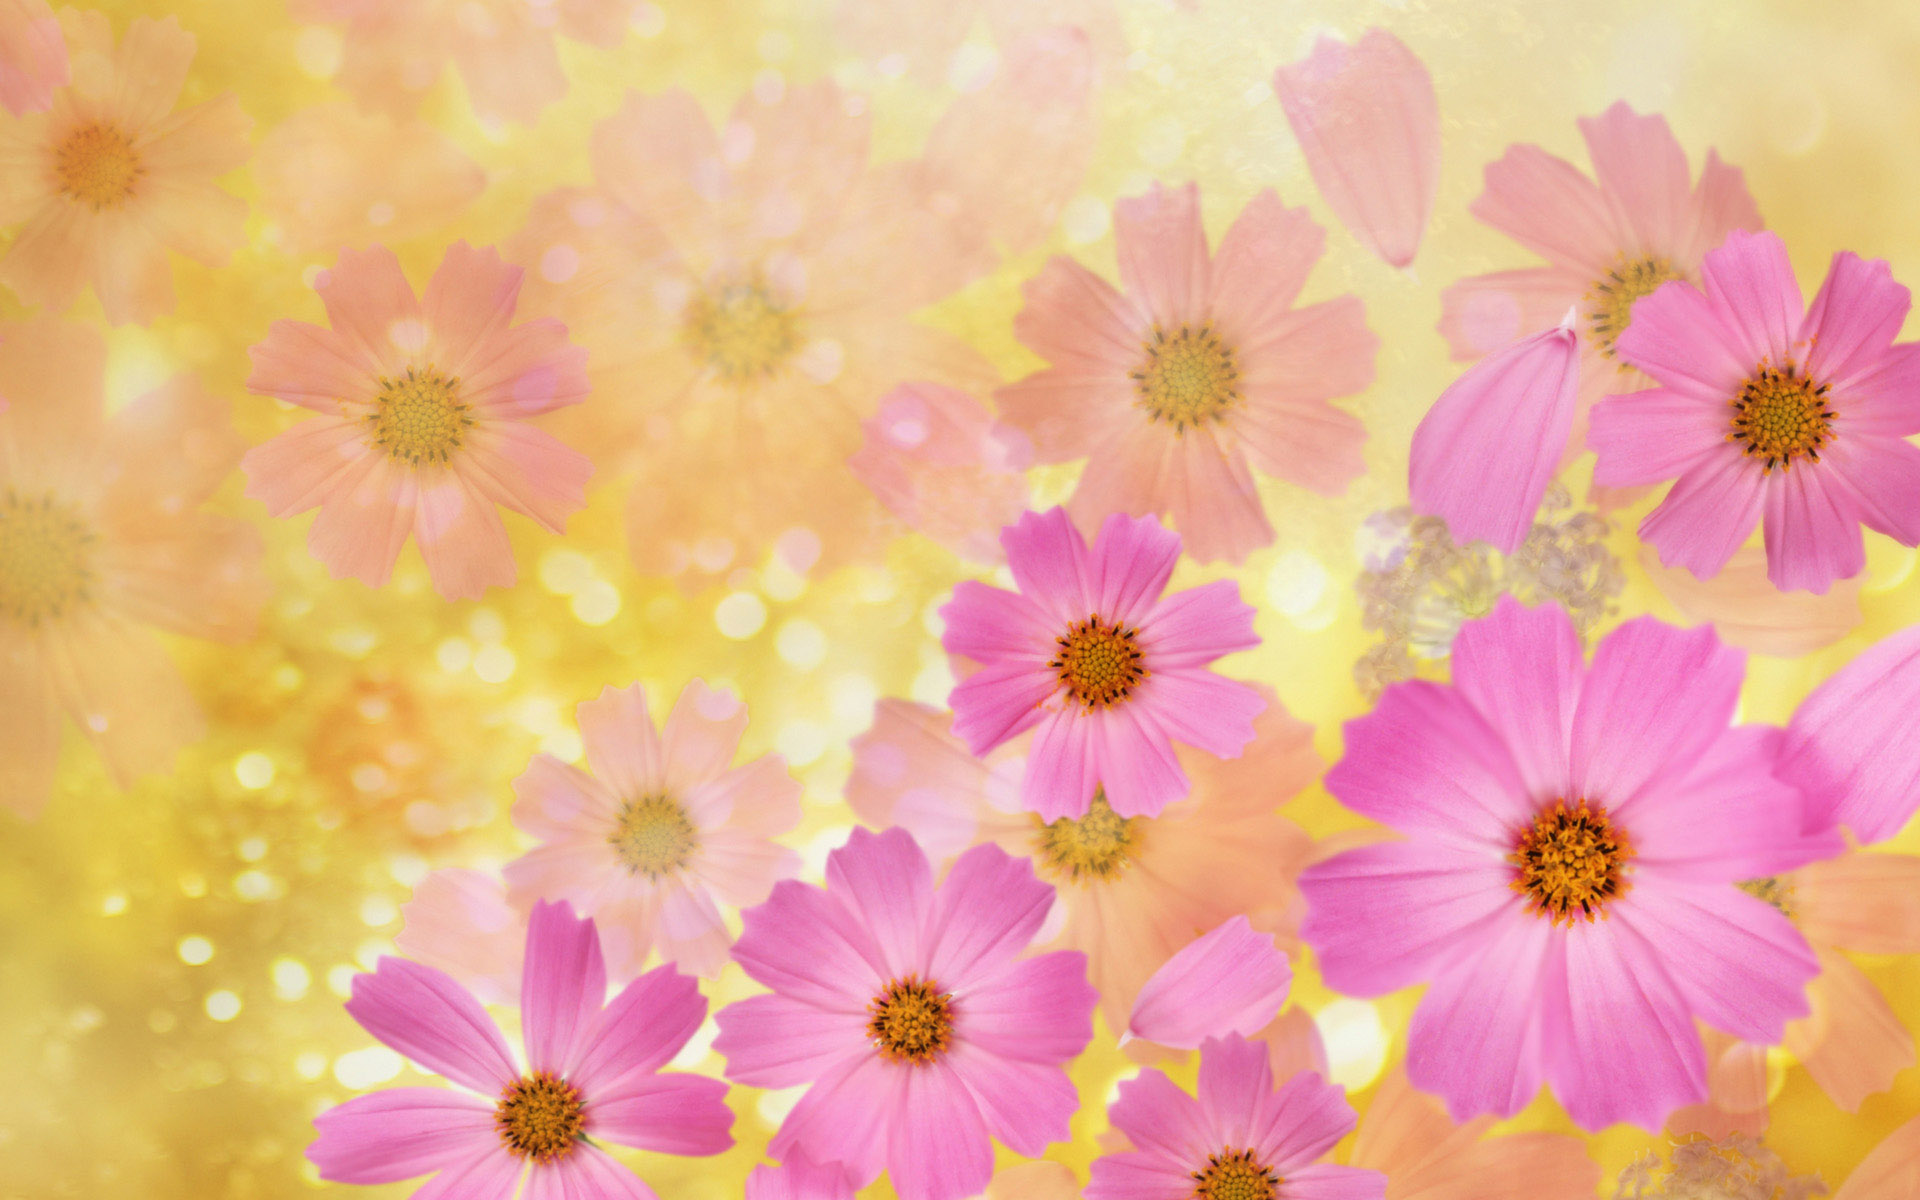 Gallery For gt Pretty Flower Backgrounds